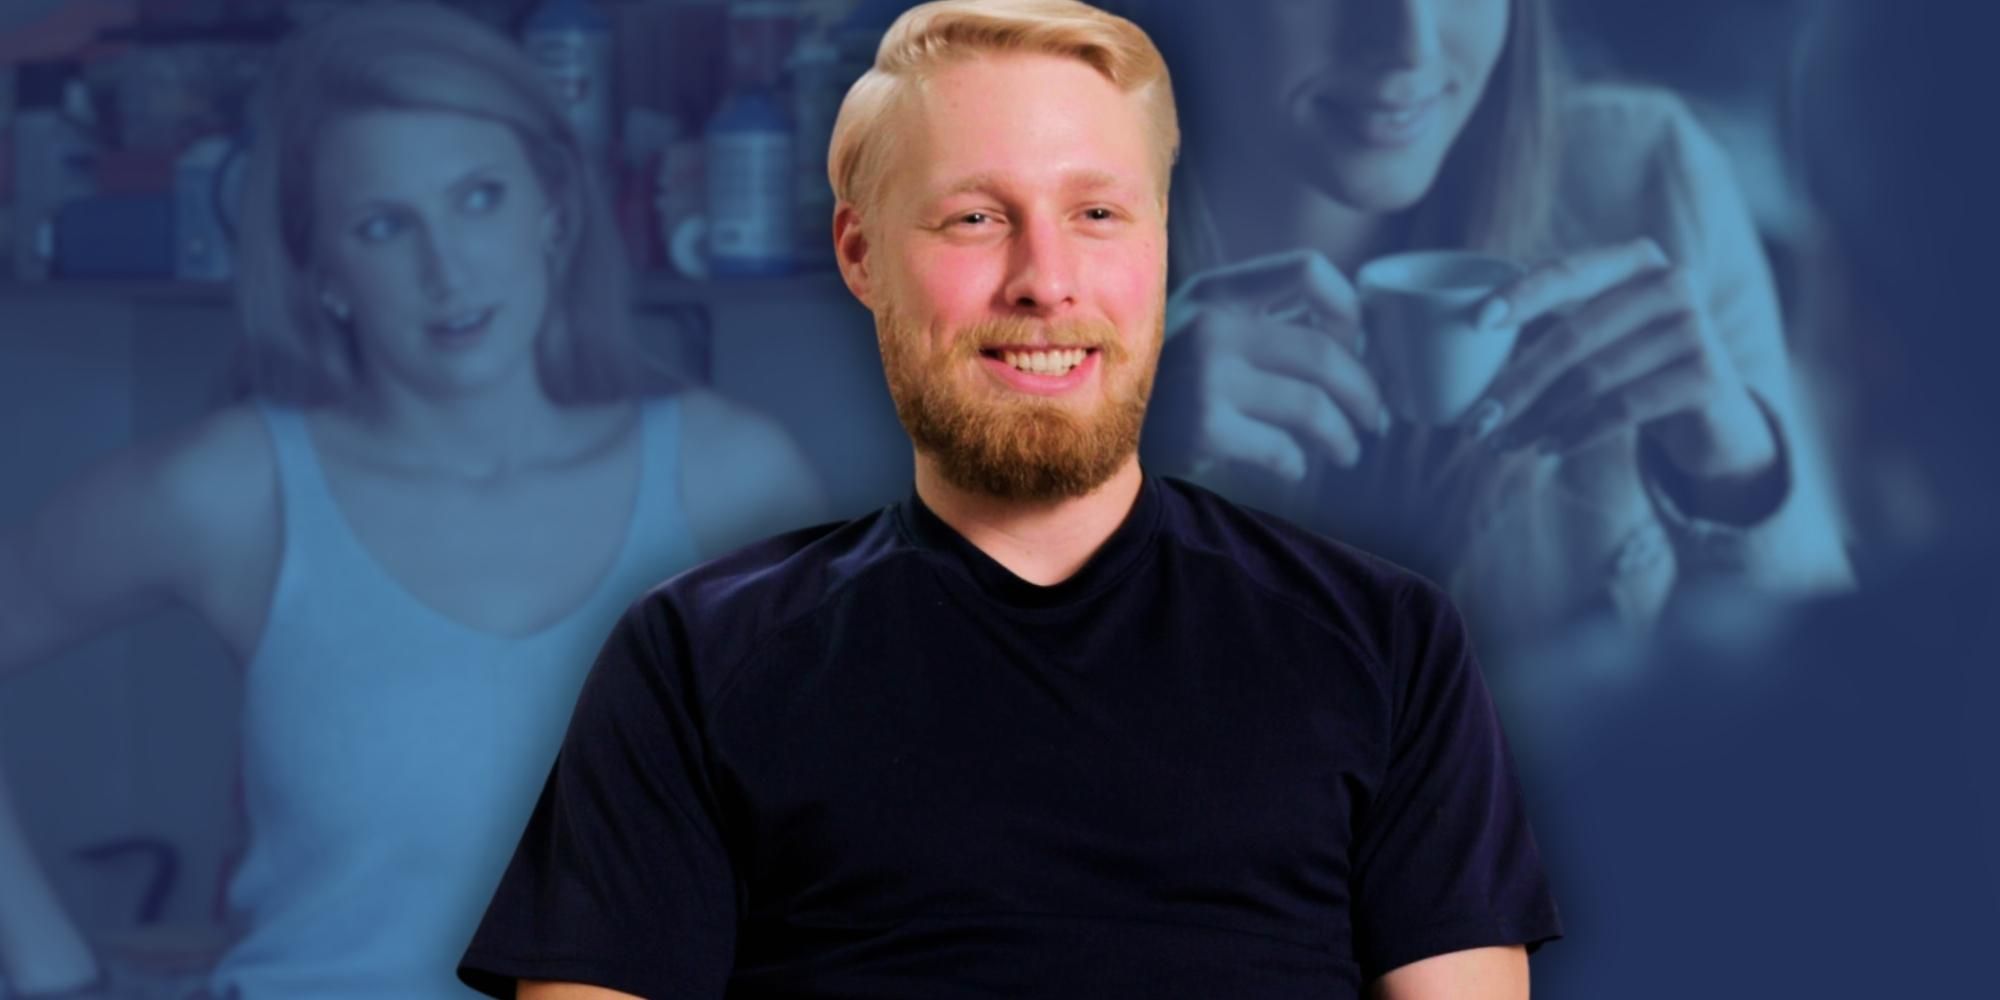 Welcome to Plathville star Ethan Plath wearing black shirt and smiling in front of blue background photo of Olivia and a woman drinking out of a mug